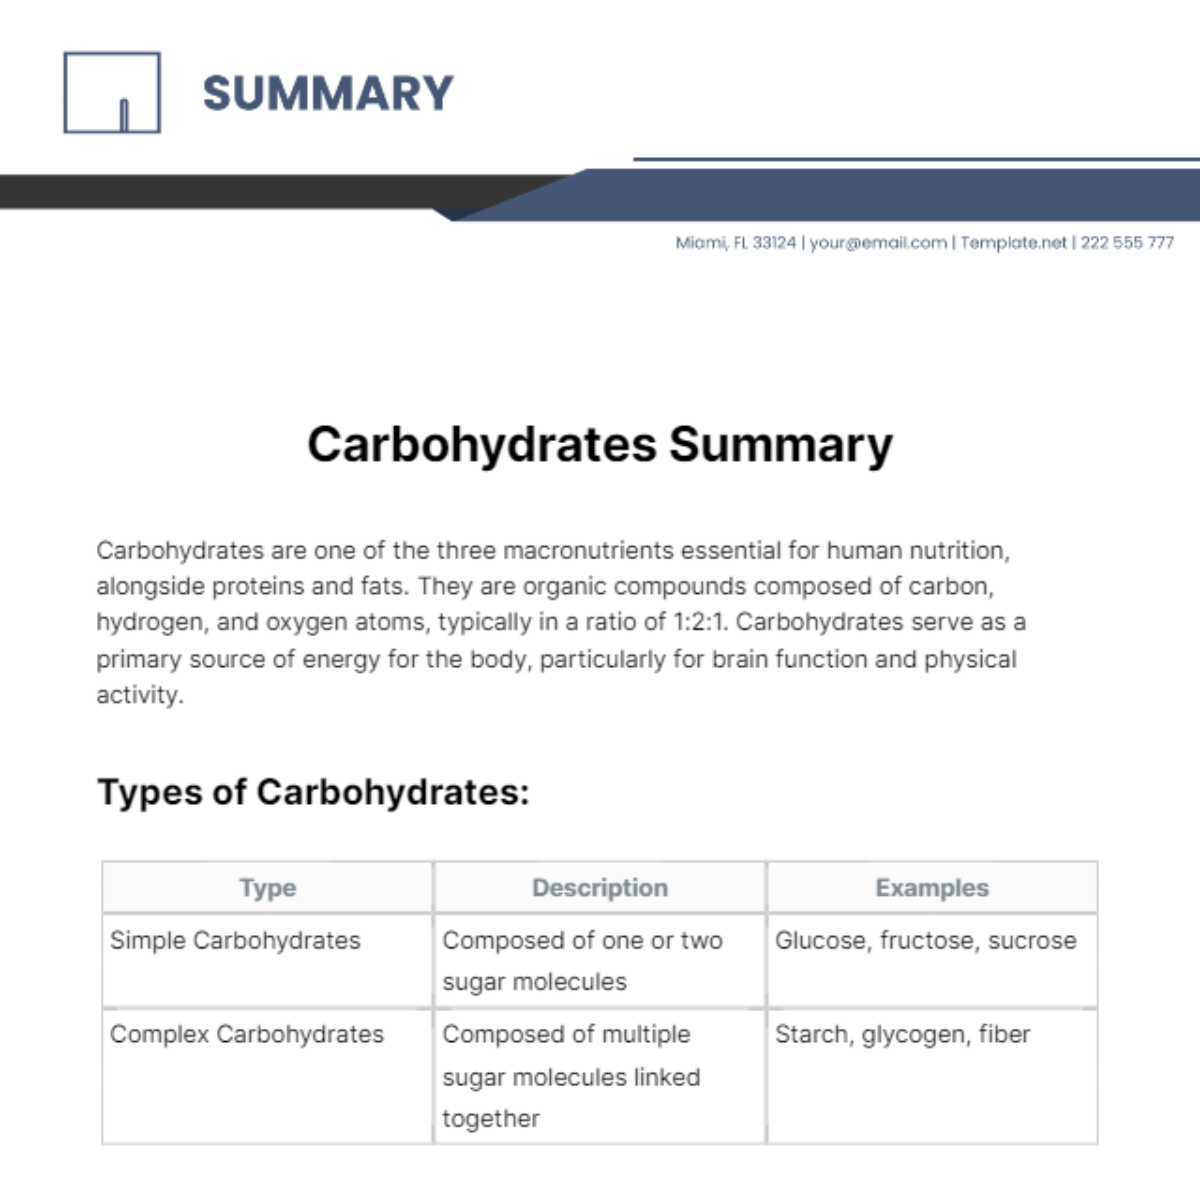 Carbohydrates Summary Template